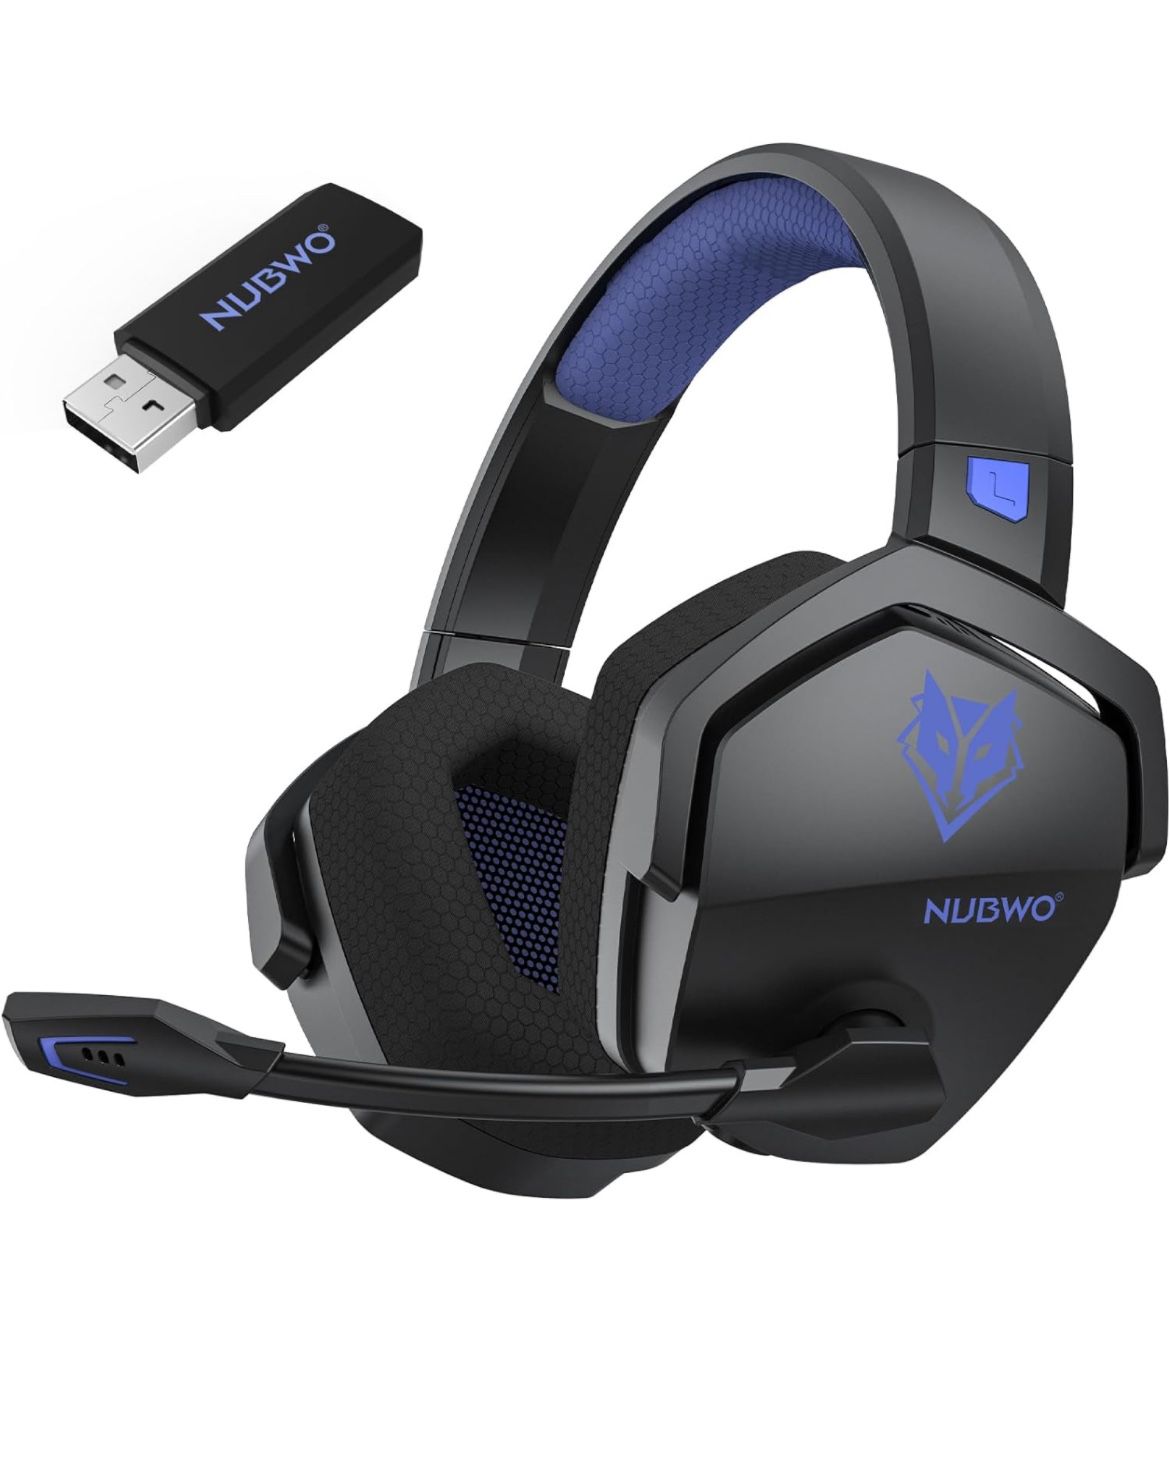 NUBWO G06 Dual Wireless Gaming Headset with Microphone for PS5, PS4, PC, Mobile,